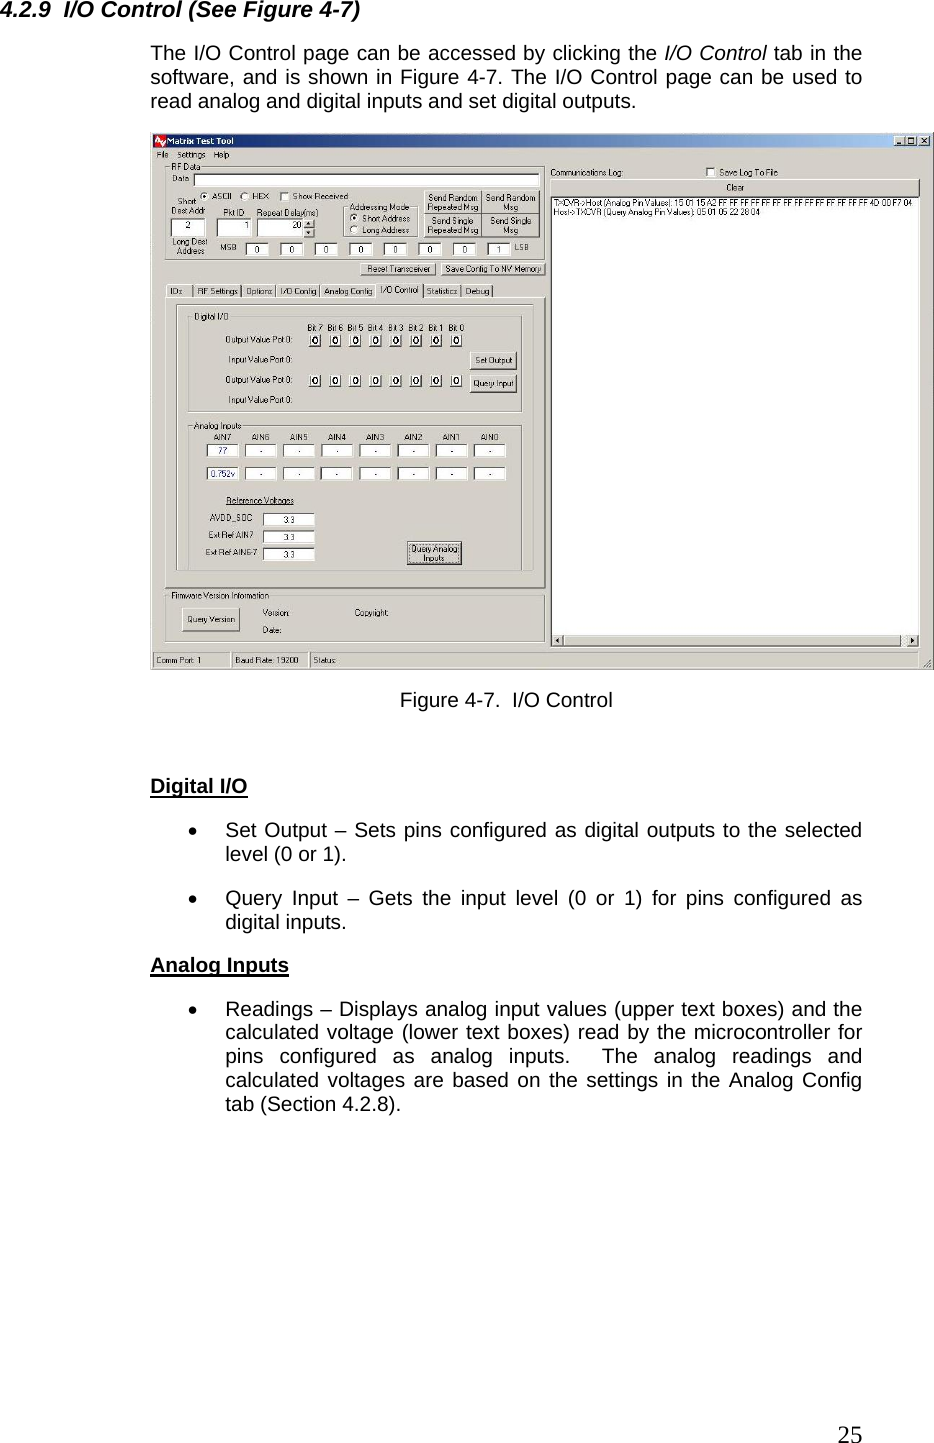  254.2.9  I/O Control (See Figure 4-7) The I/O Control page can be accessed by clicking the I/O Control tab in the software, and is shown in Figure 4-7. The I/O Control page can be used to read analog and digital inputs and set digital outputs.  Figure 4-7.  I/O Control   Digital I/O •  Set Output – Sets pins configured as digital outputs to the selected level (0 or 1). •  Query Input – Gets the input level (0 or 1) for pins configured as digital inputs. Analog Inputs •  Readings – Displays analog input values (upper text boxes) and the calculated voltage (lower text boxes) read by the microcontroller for pins configured as analog inputs.  The analog readings and calculated voltages are based on the settings in the Analog Config tab (Section 4.2.8).  